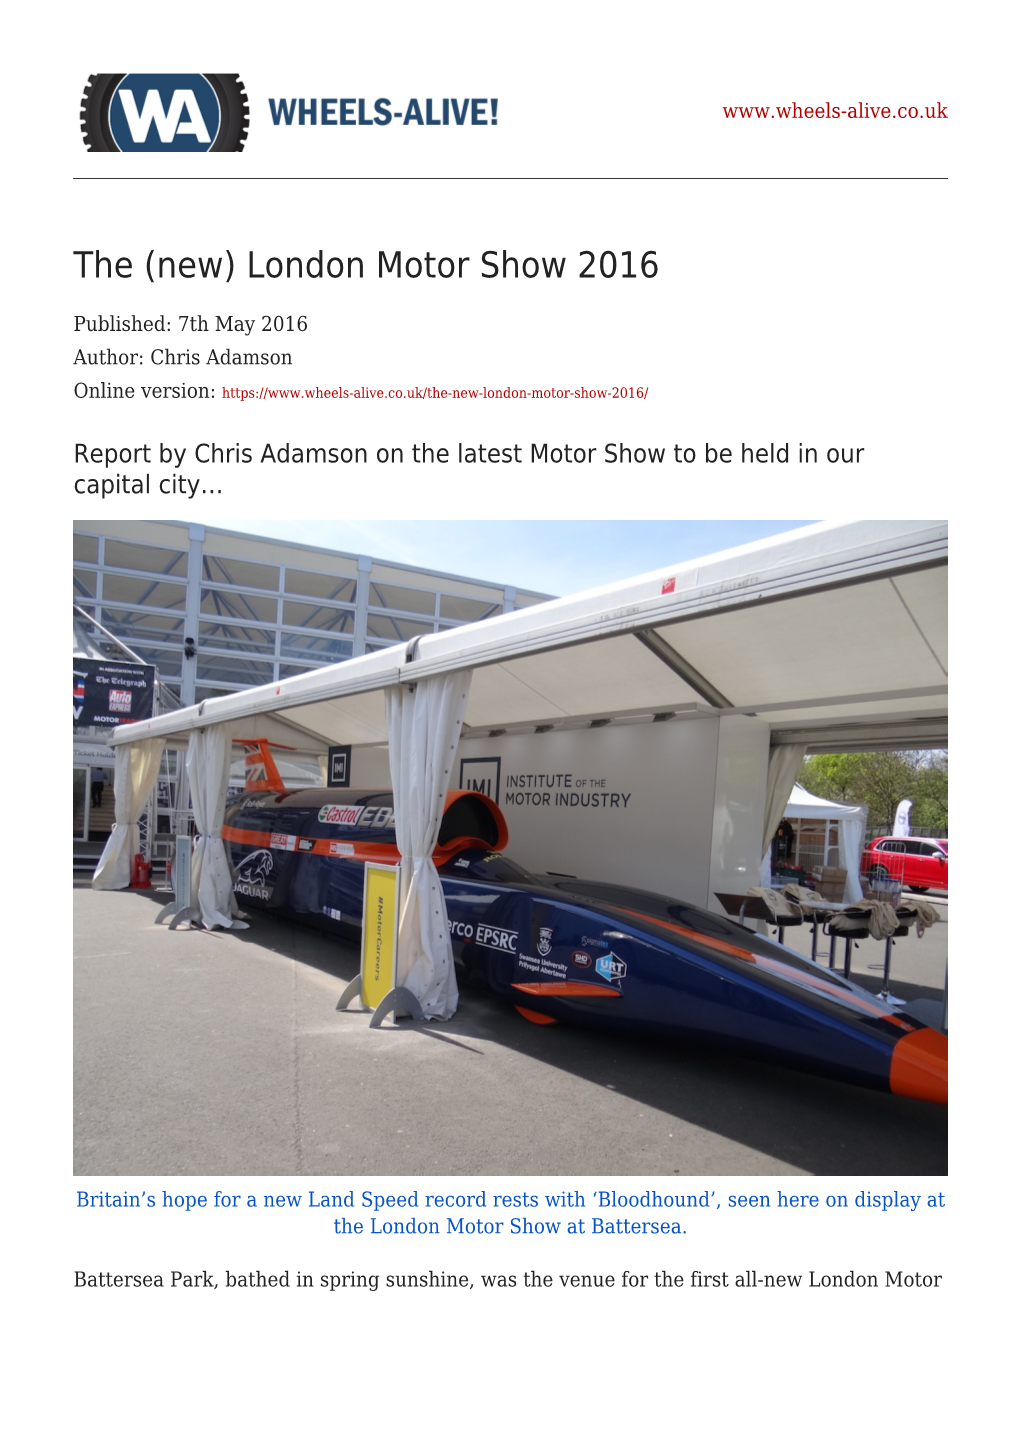 The (New) London Motor Show 2016